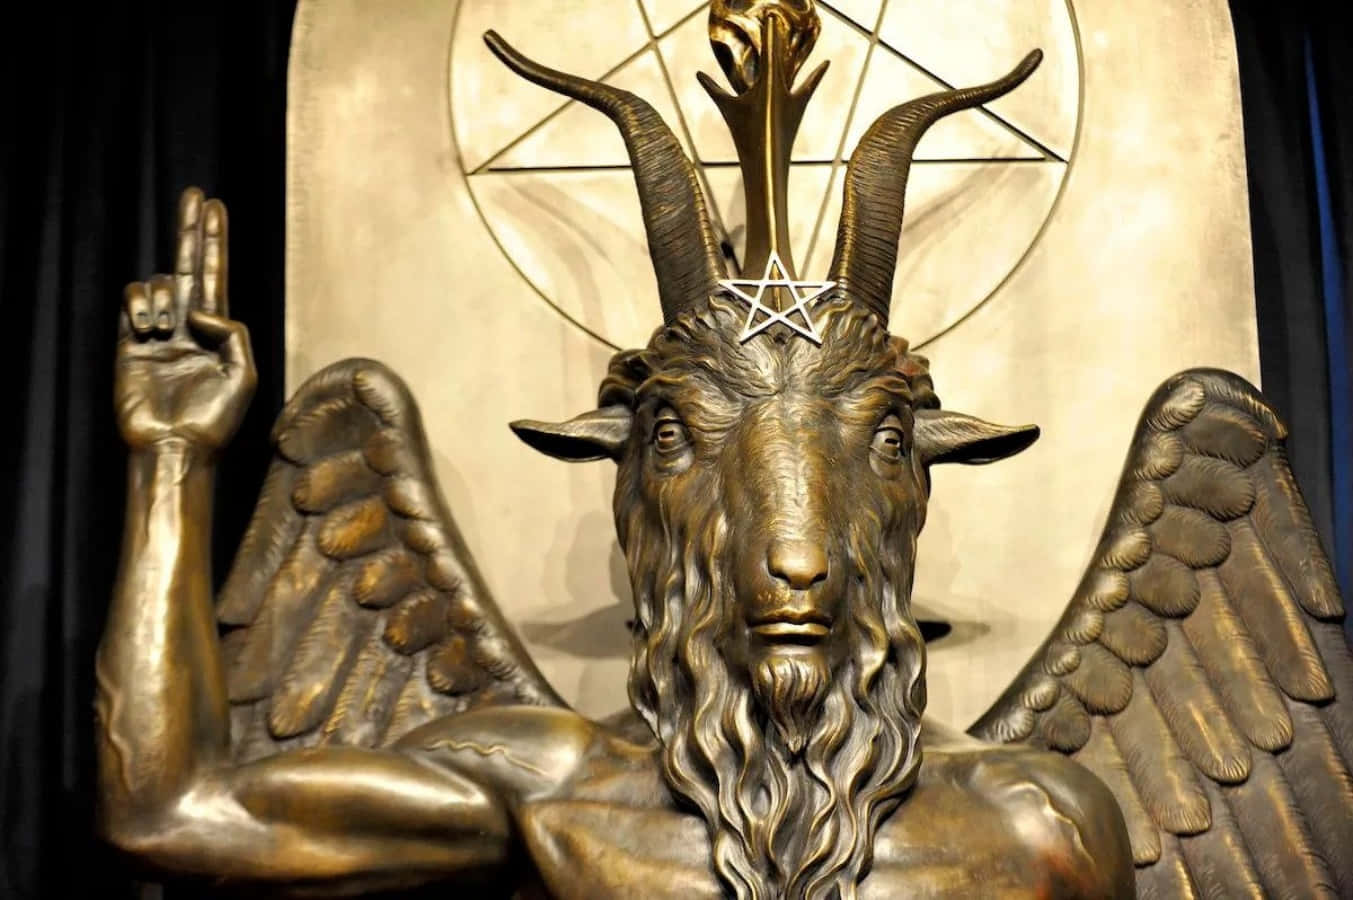 A Statue Of A Goat With Horns And A Pentagram